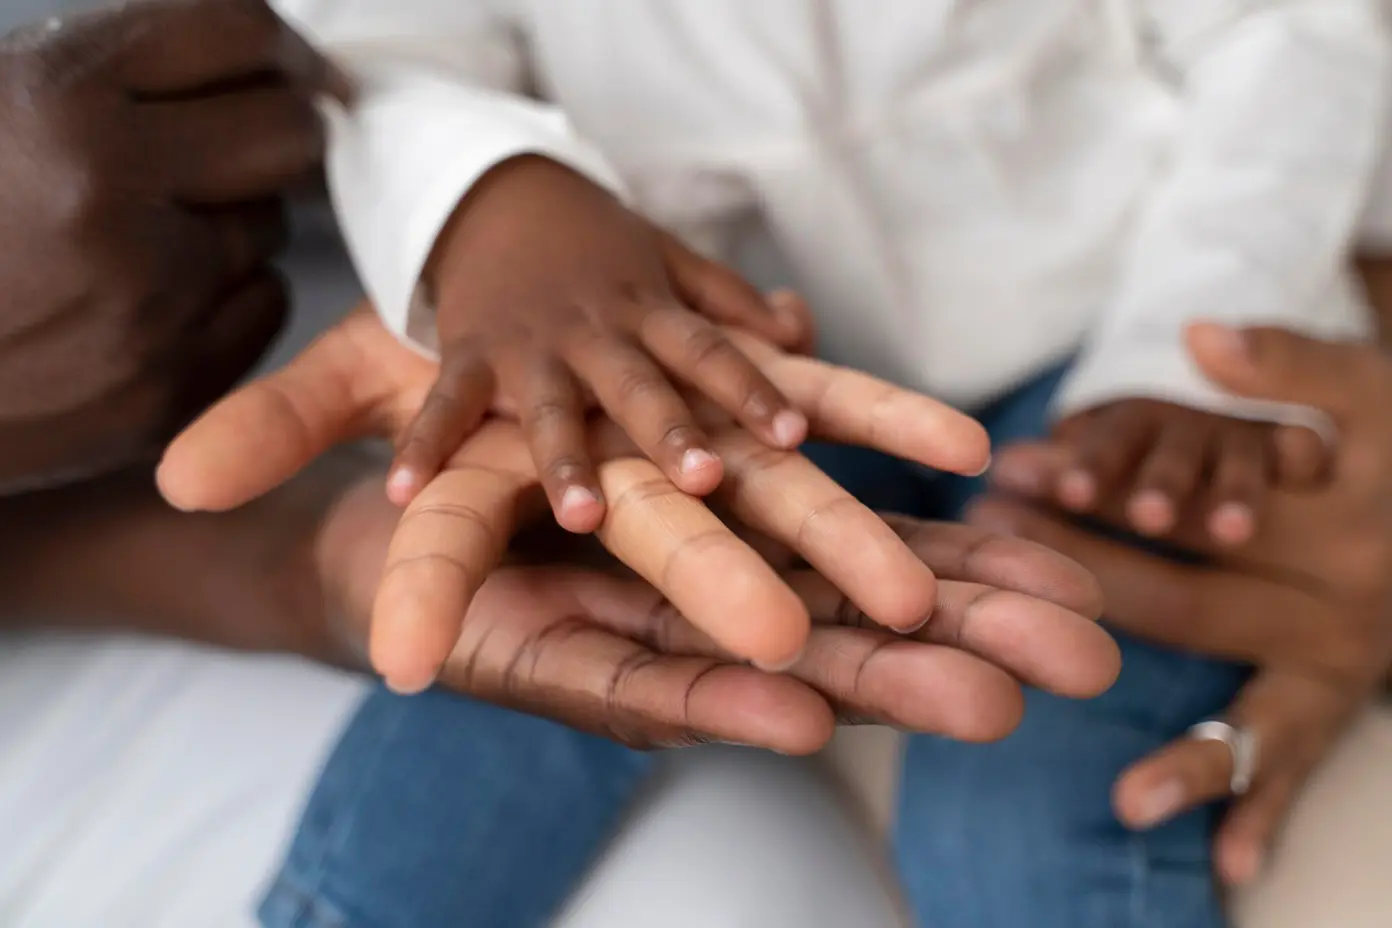 A child hands on top of adults' hands